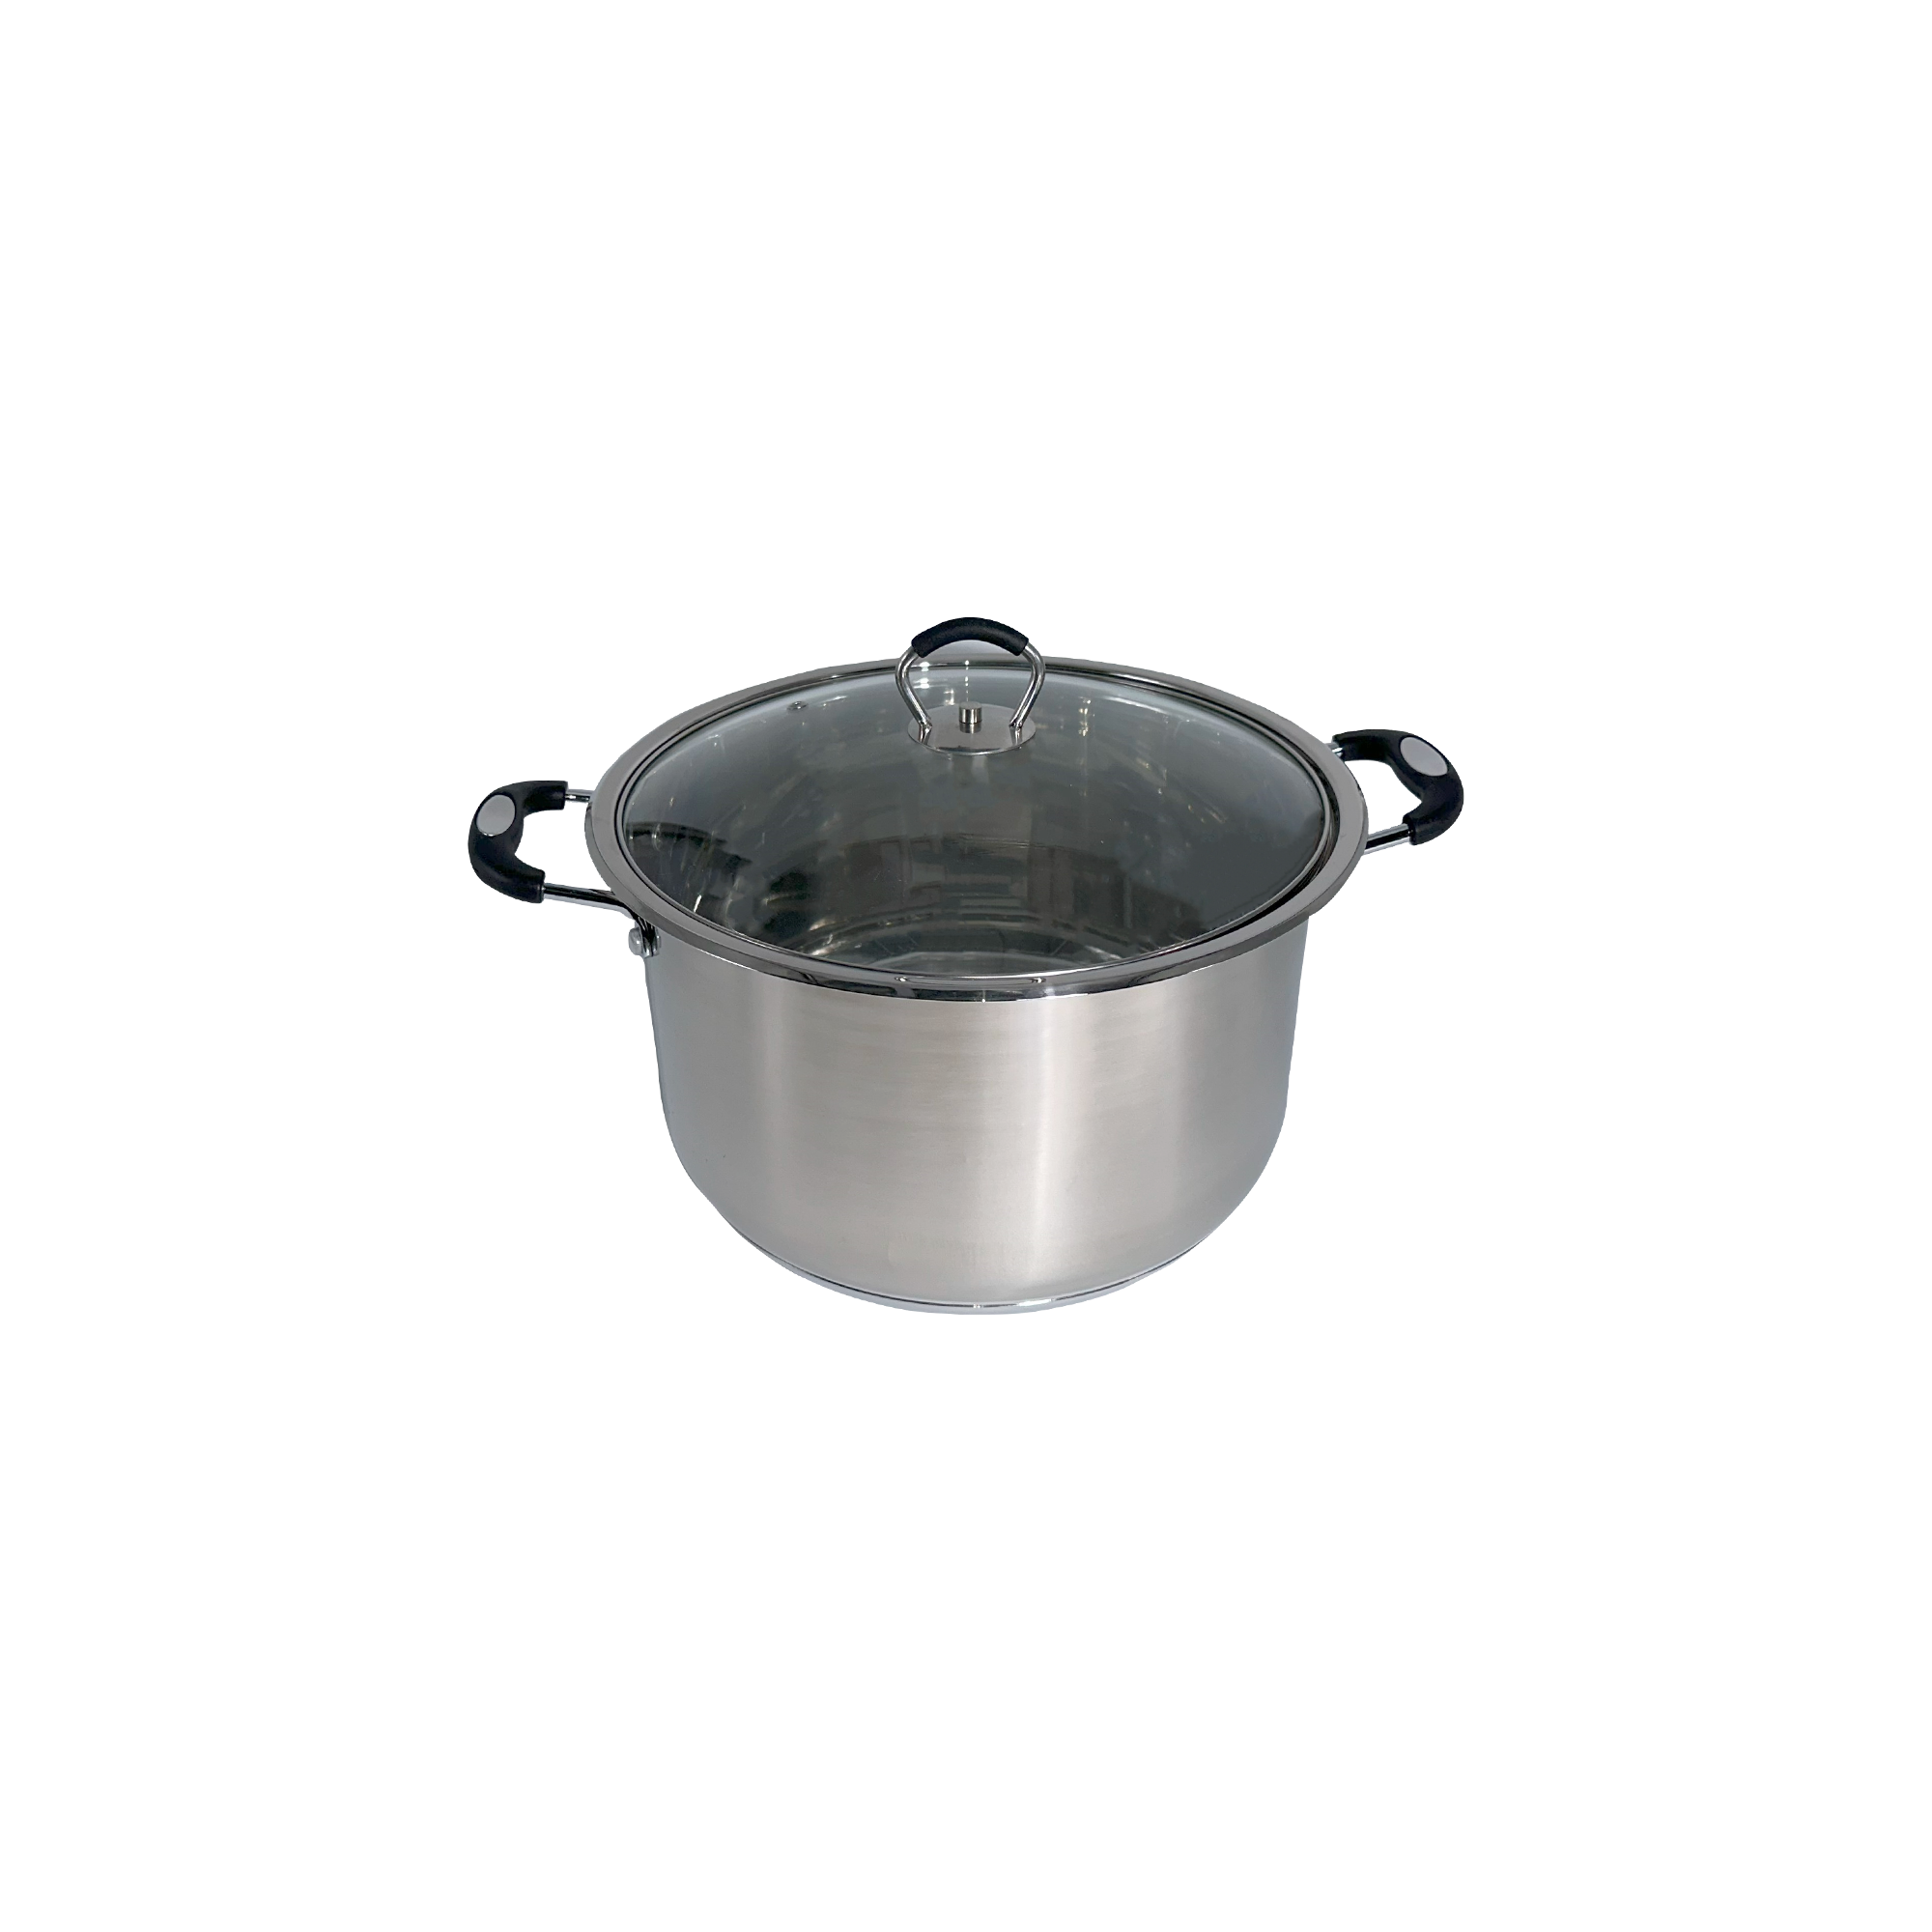 Glaxa Stainless Steel Induction Base Casserole/Pots With Lid - 26cm